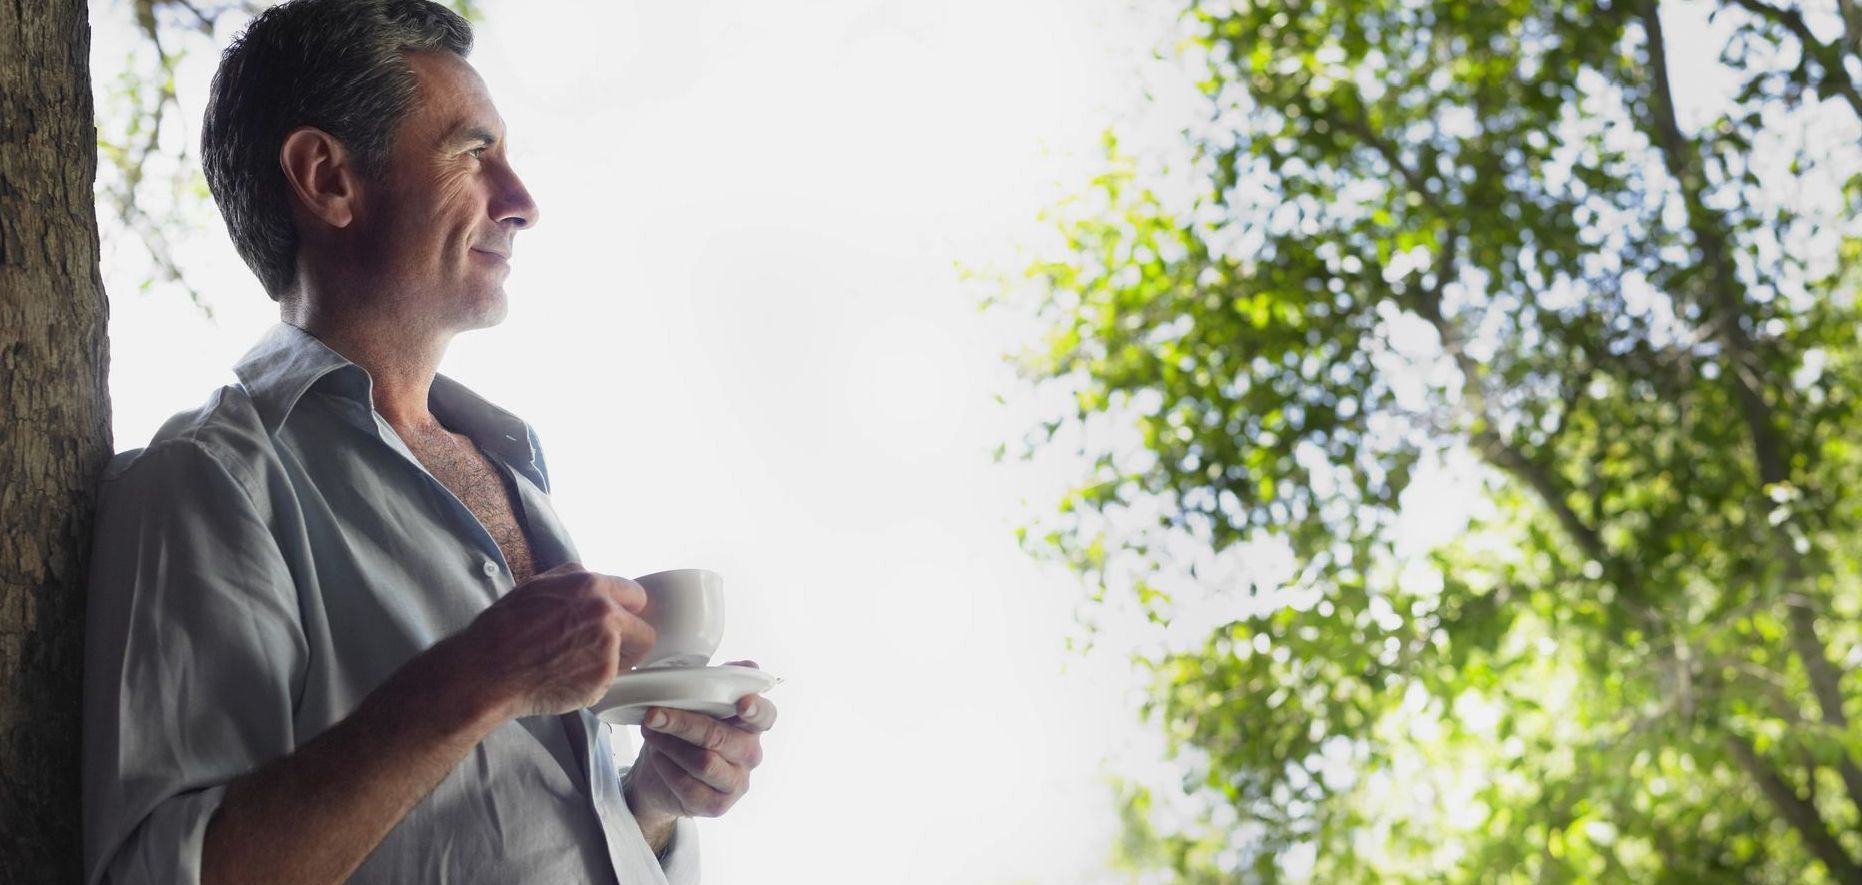 A man enjoys a cup of coffee looking out at nature.